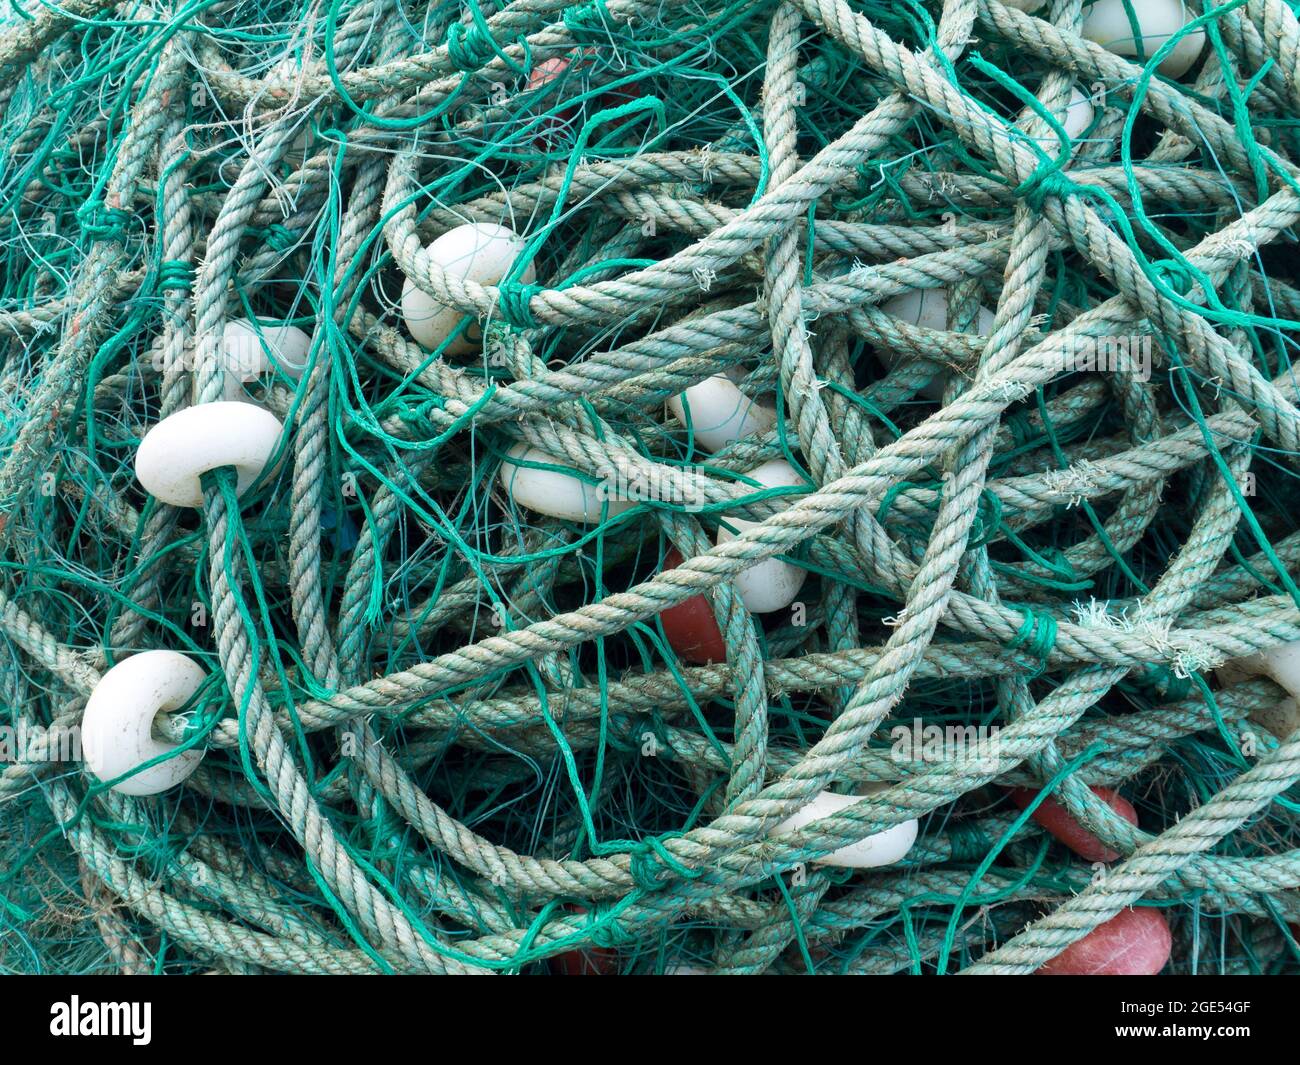 LUARCA, SPAIN - DECEMBER 4, 2016: Green fishing net with white floats at the fish market pier in Luarca, Spain. Stock Photo